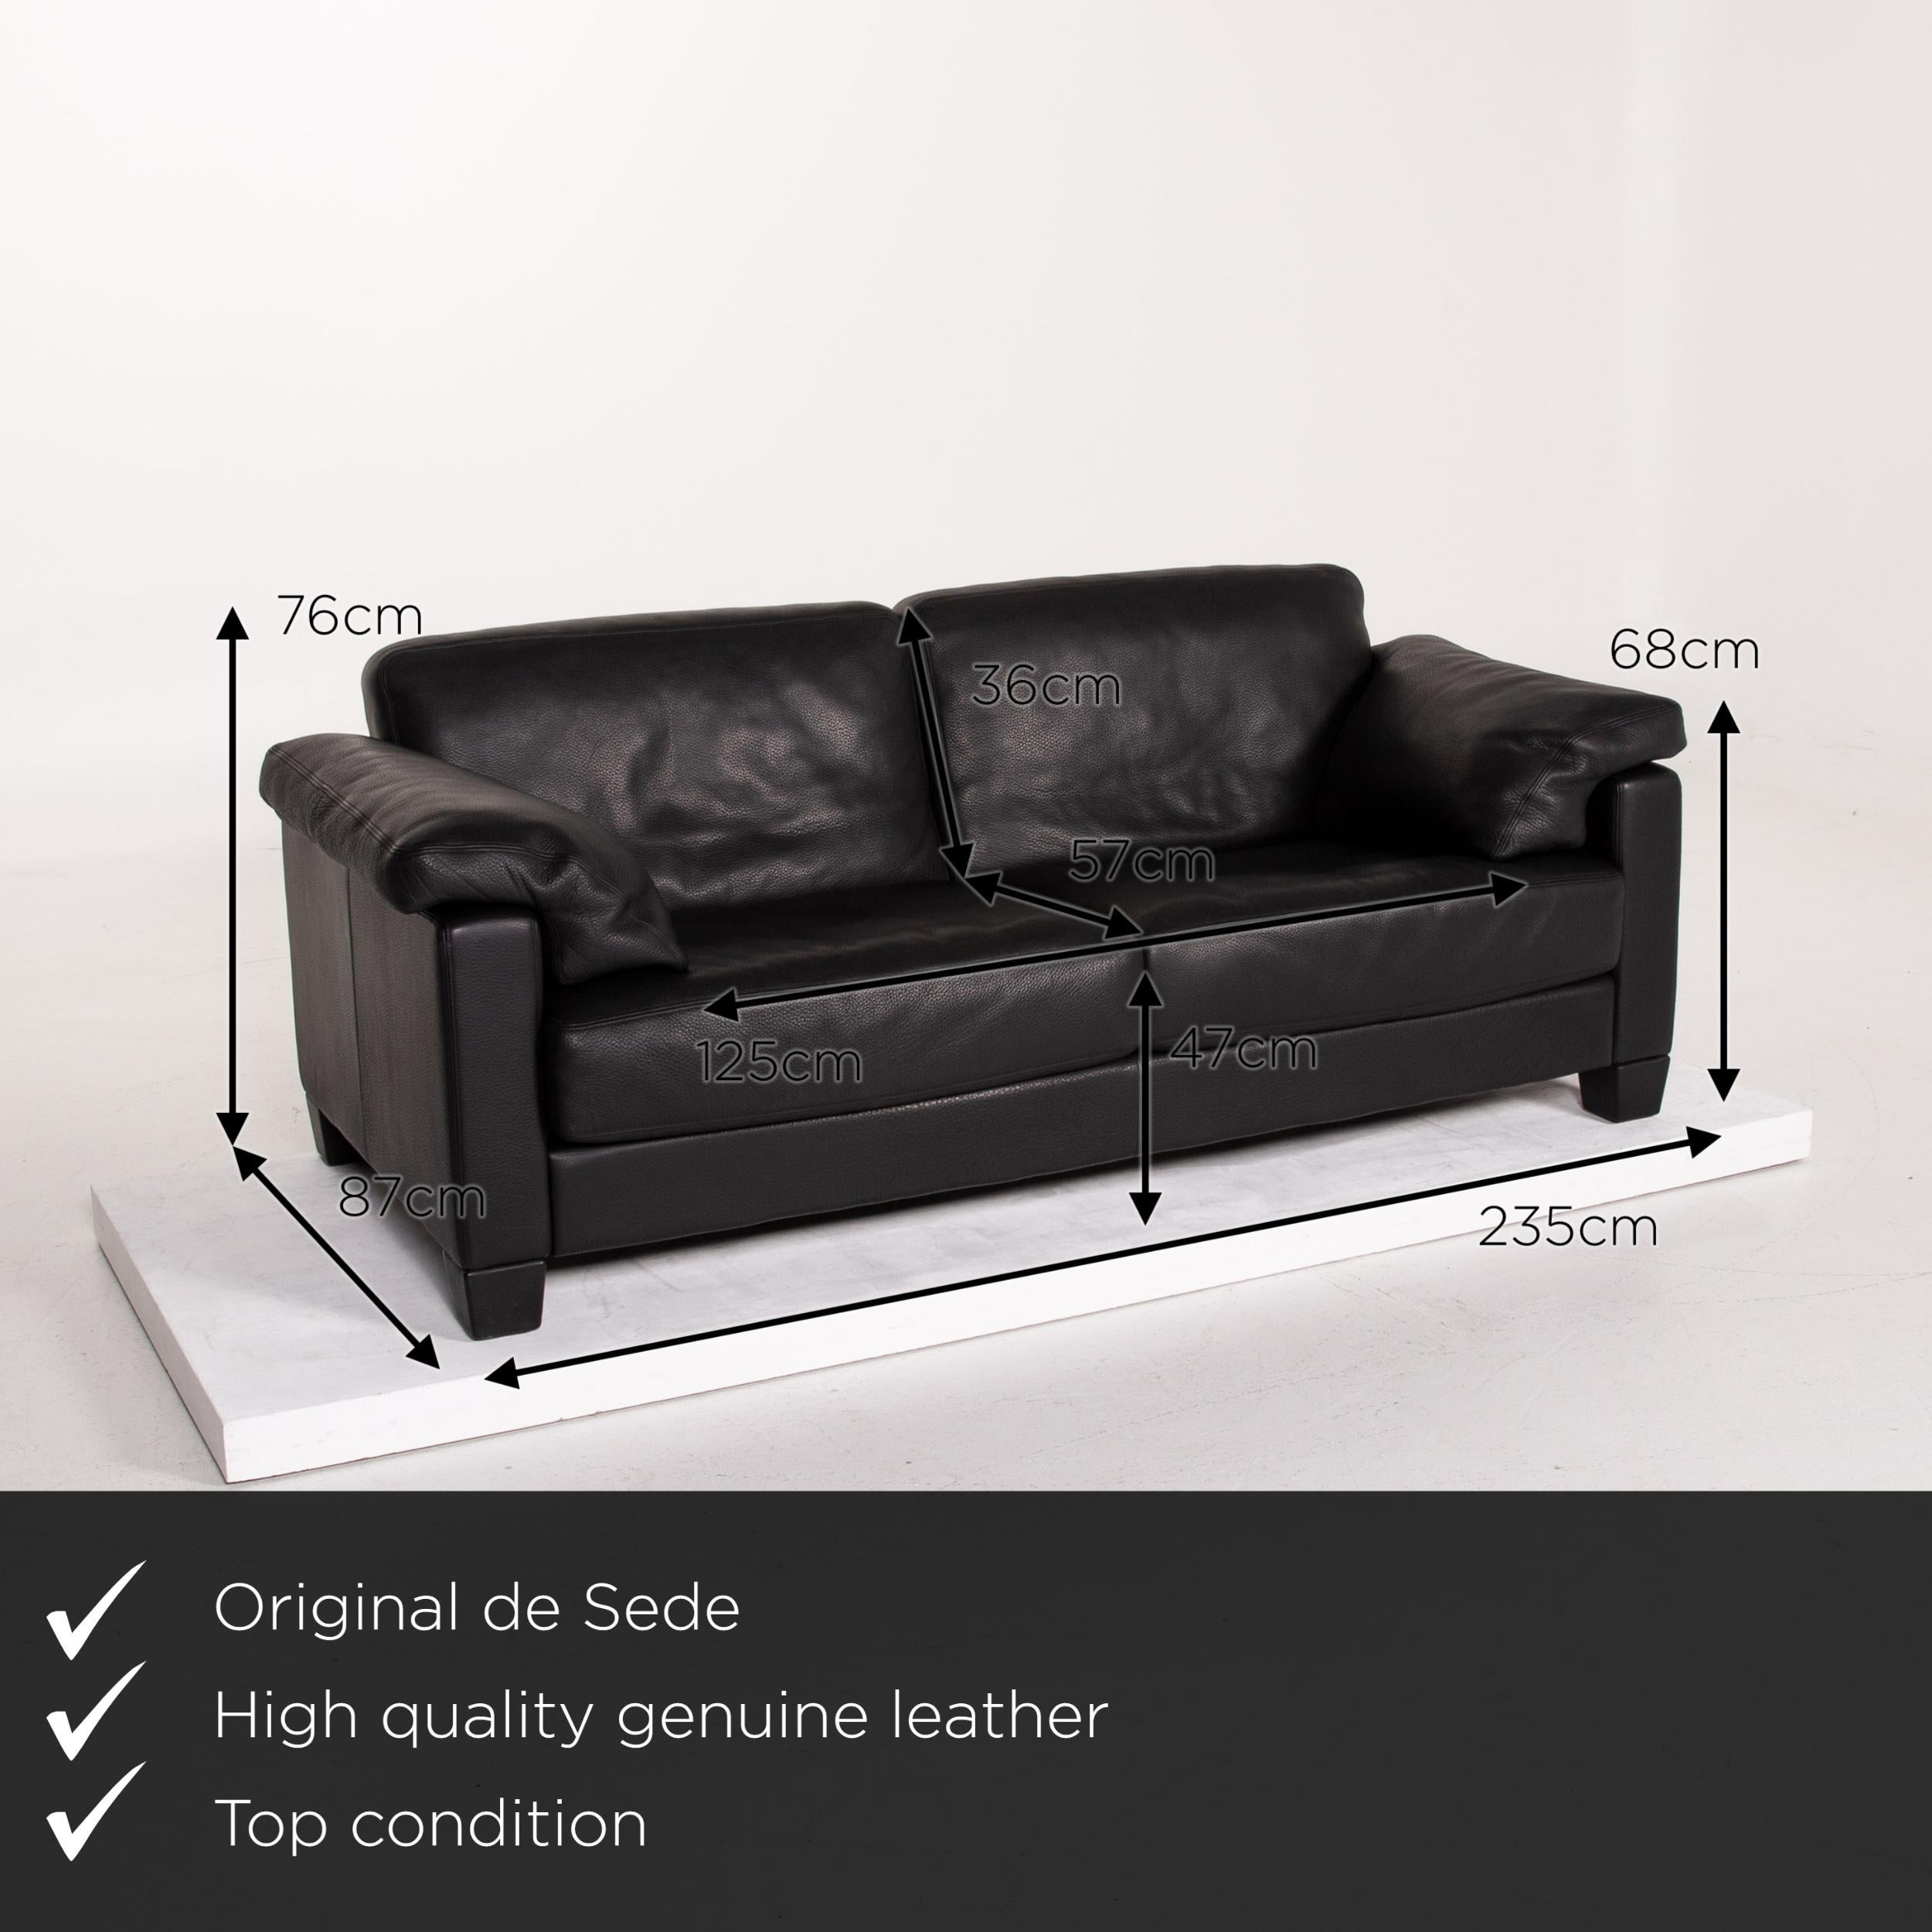 We present to you a De Sede DS 17 leather sofa set black 2 two-seat.

 

 Product measurements in centimeters:
 

Depth 87
Width 235
Height 76
Seat height 47
Rest height 68
Seat depth 57
Seat width 125
Back height 36.